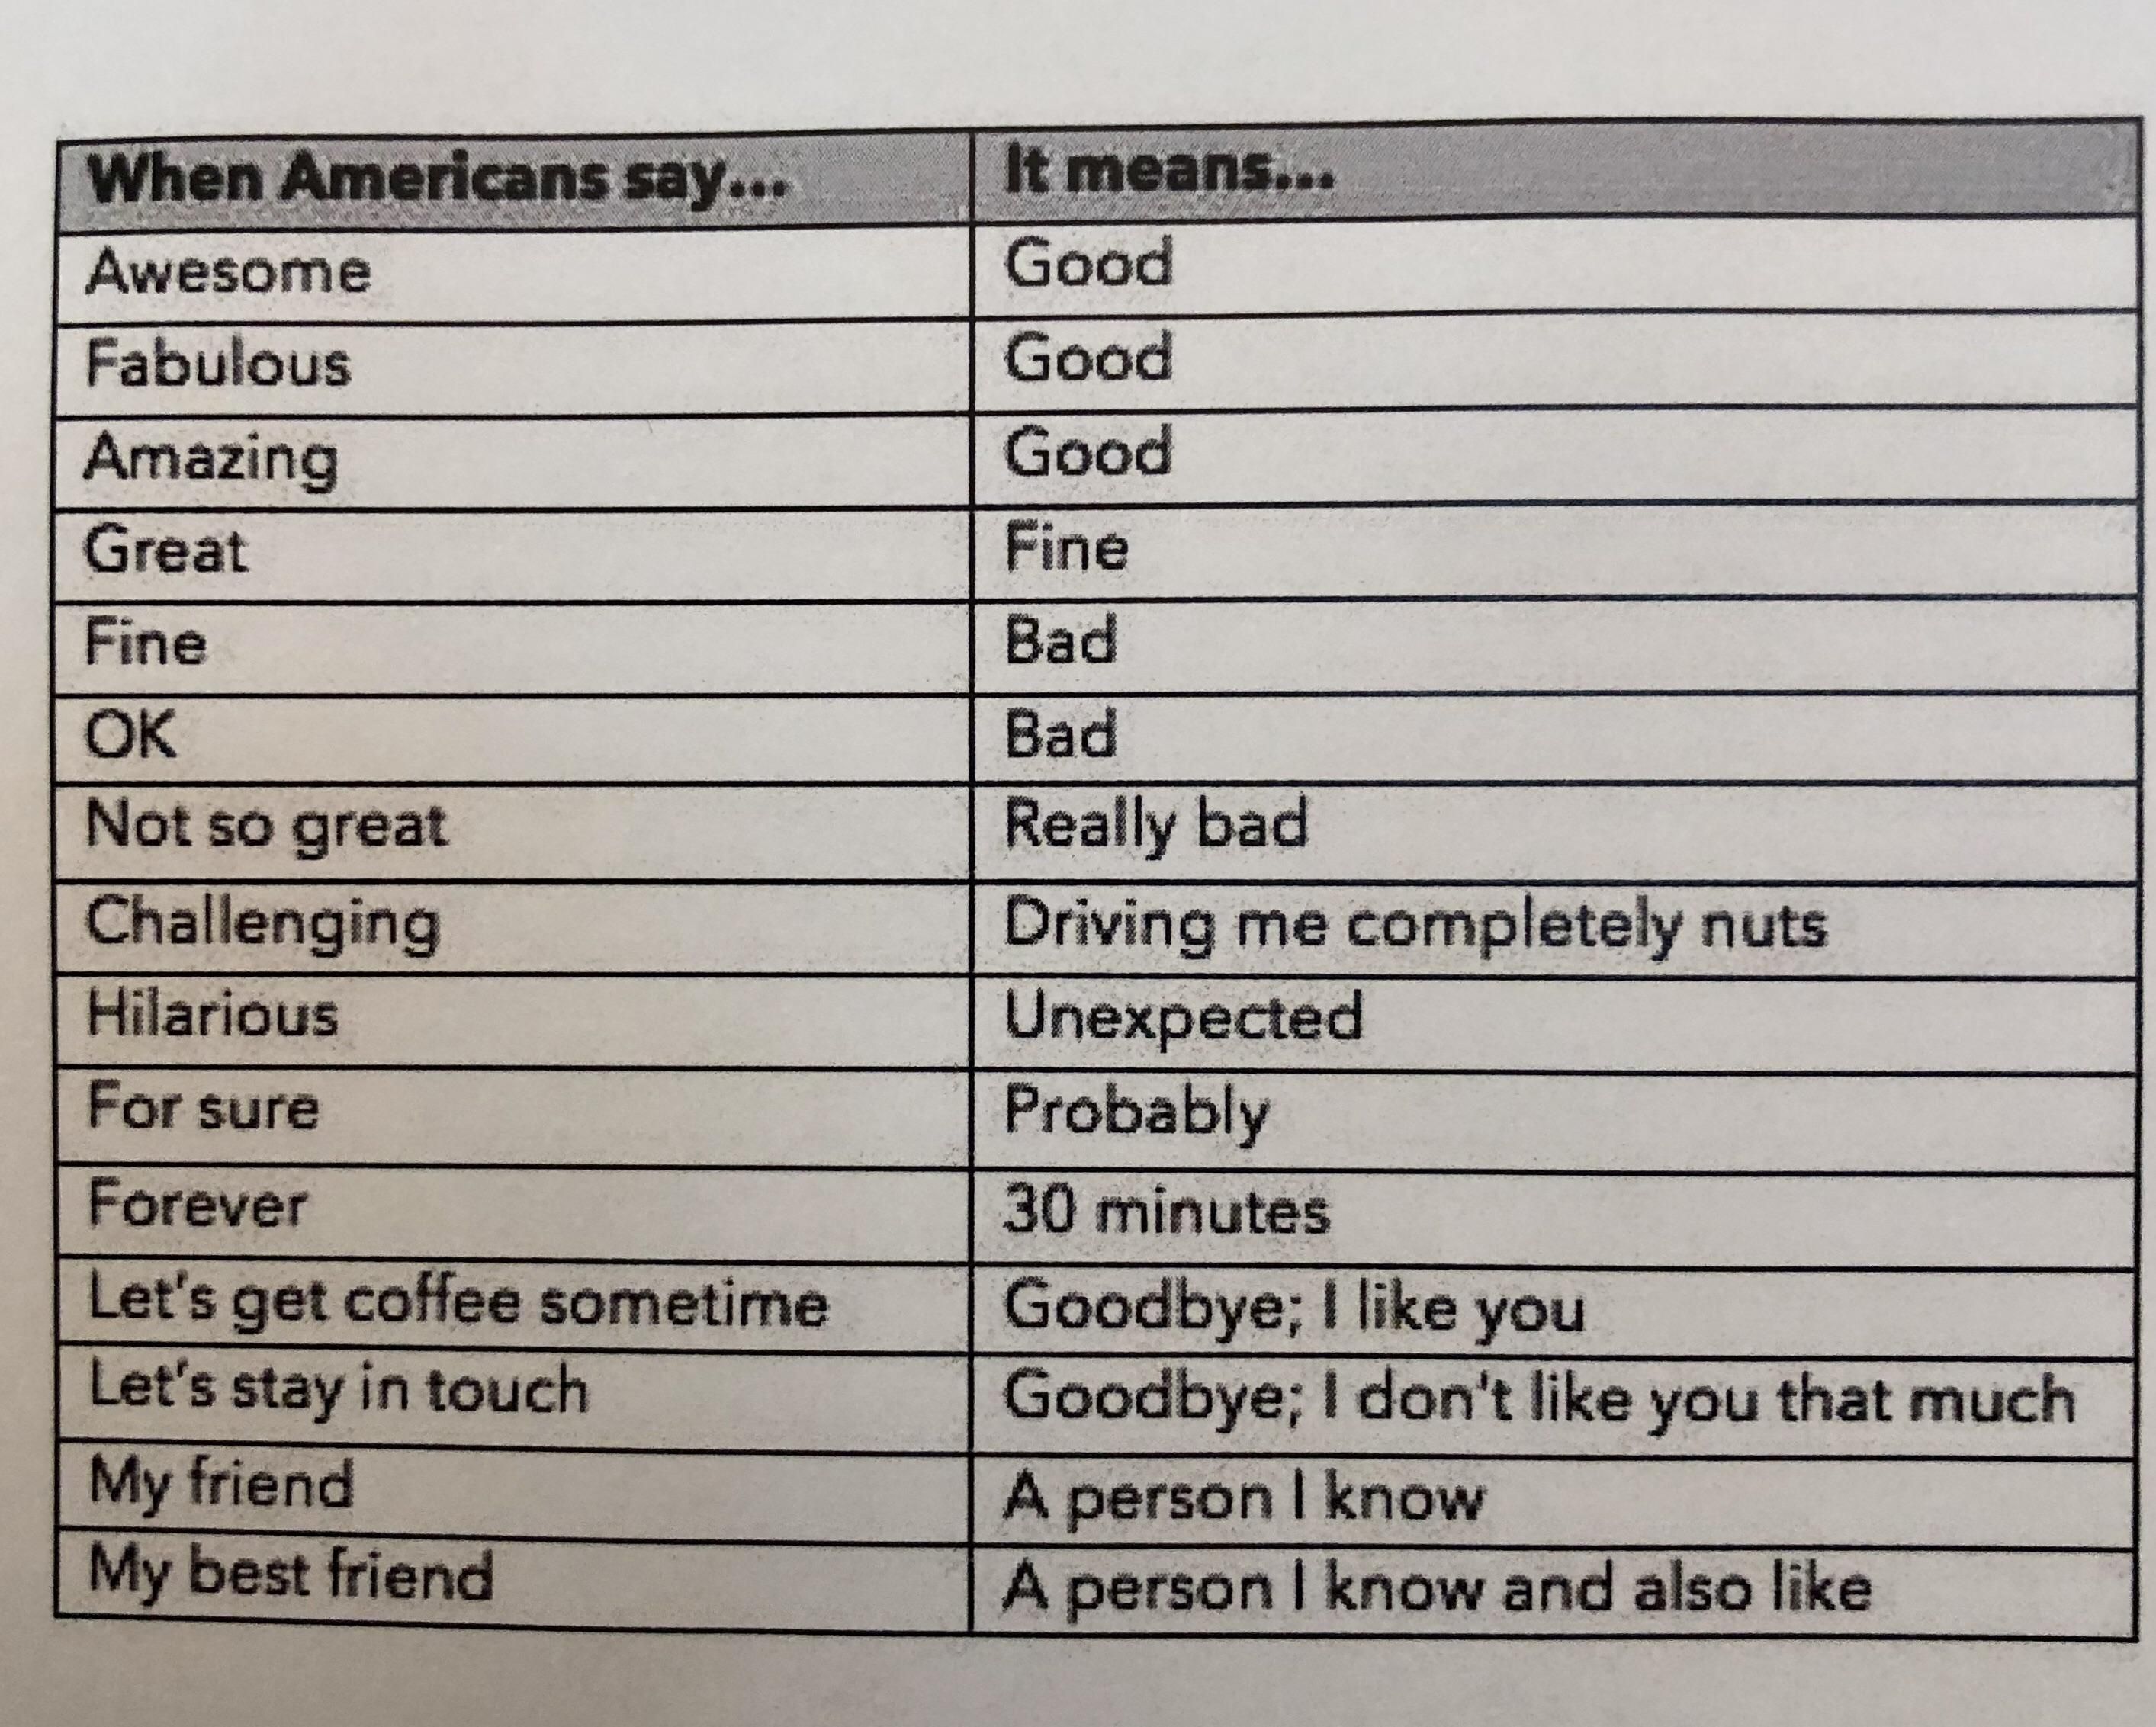 Posted at my non-American coworker’s desk. We here in the US are a confusing bunch.